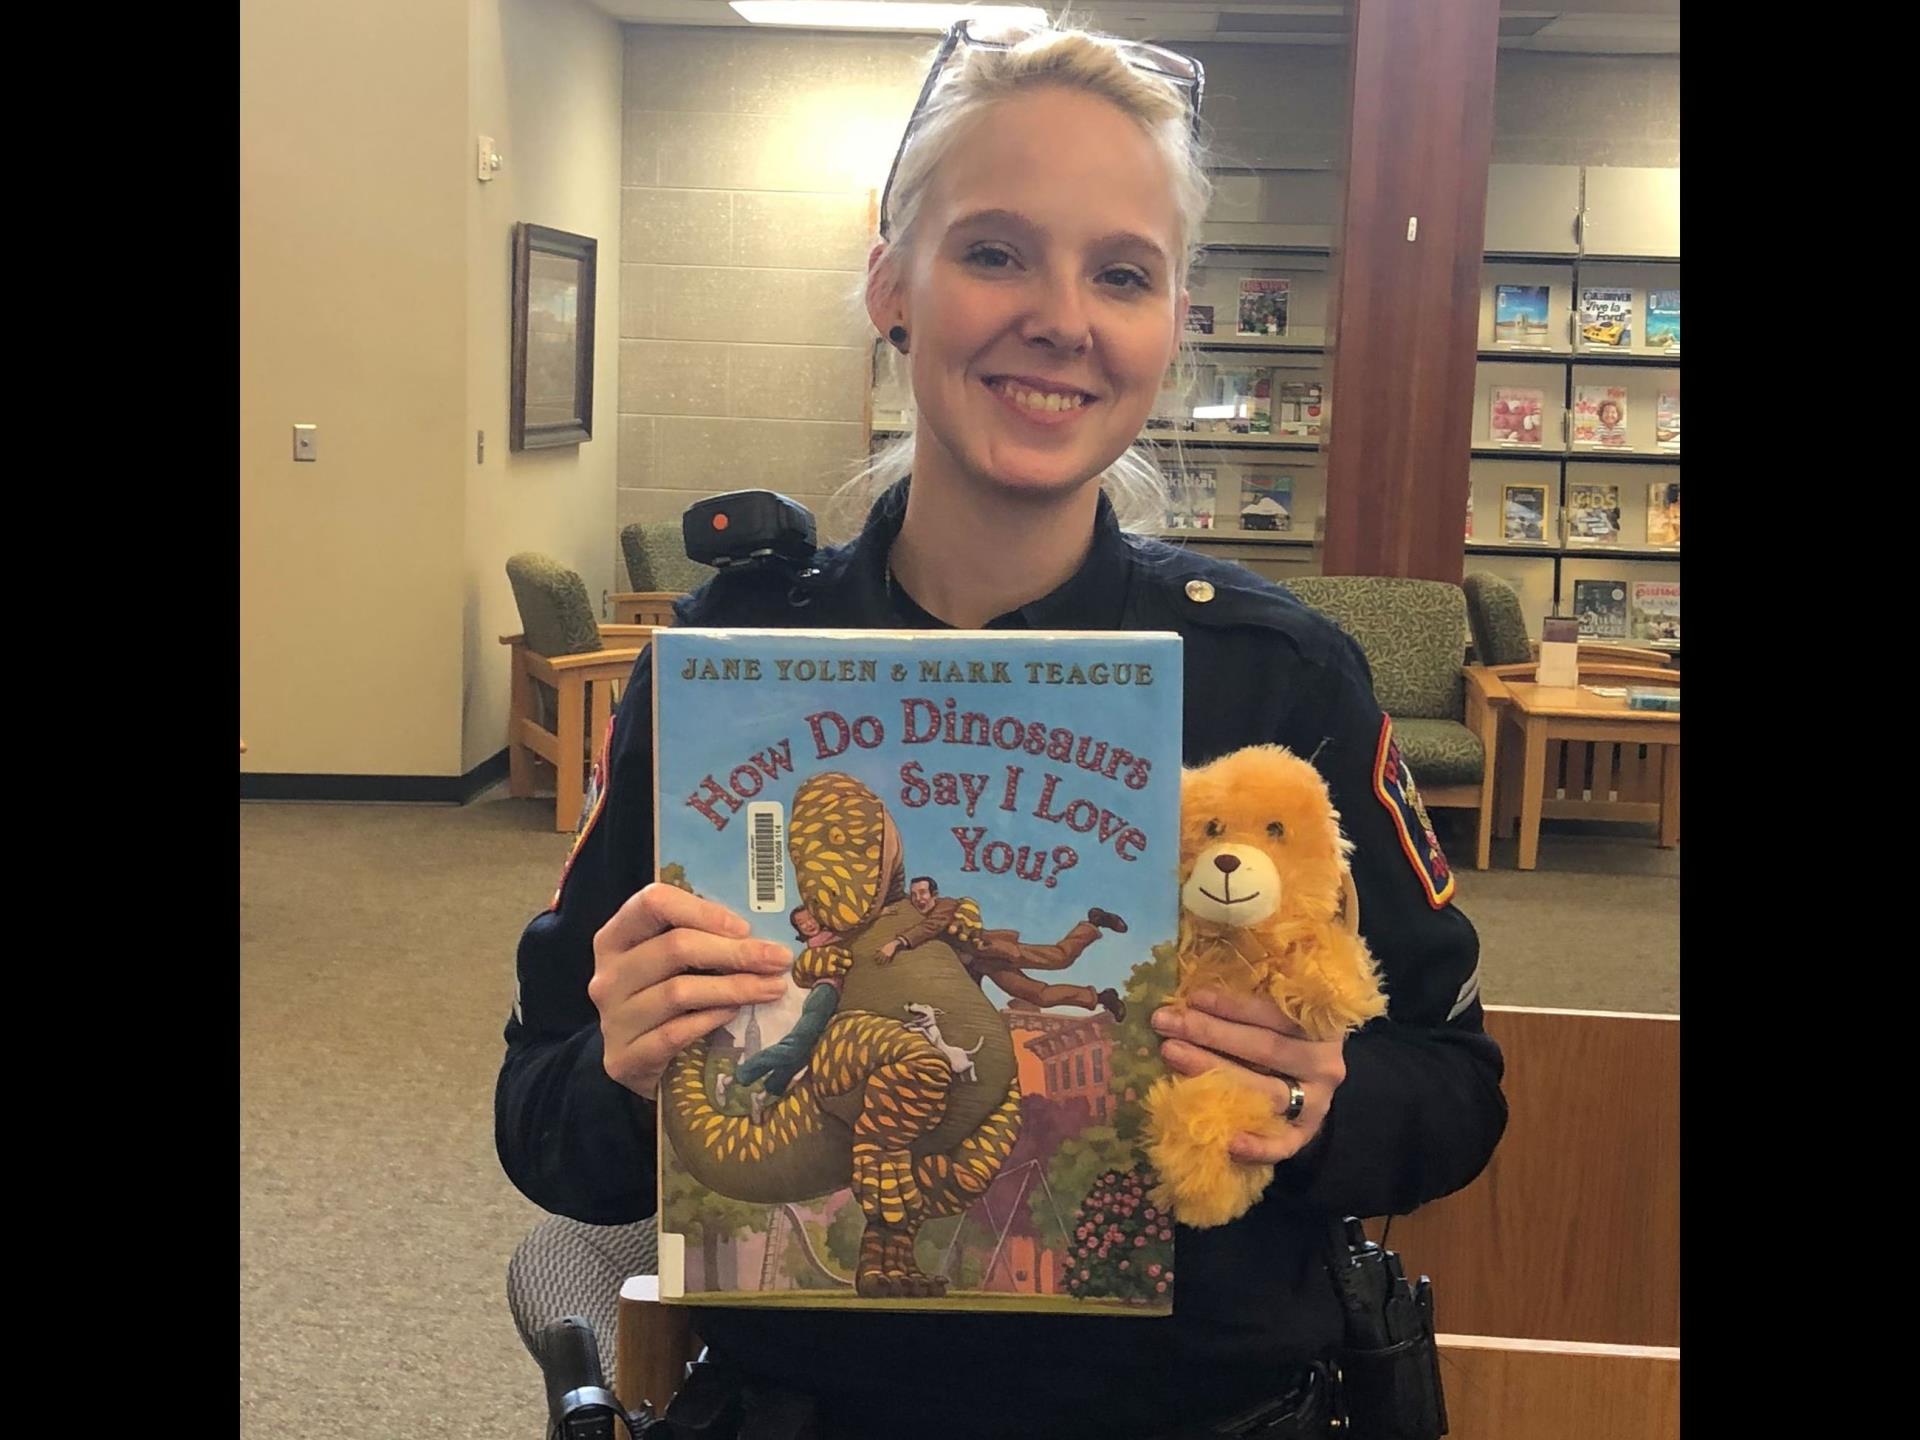 Police officer with book and stuffed animal